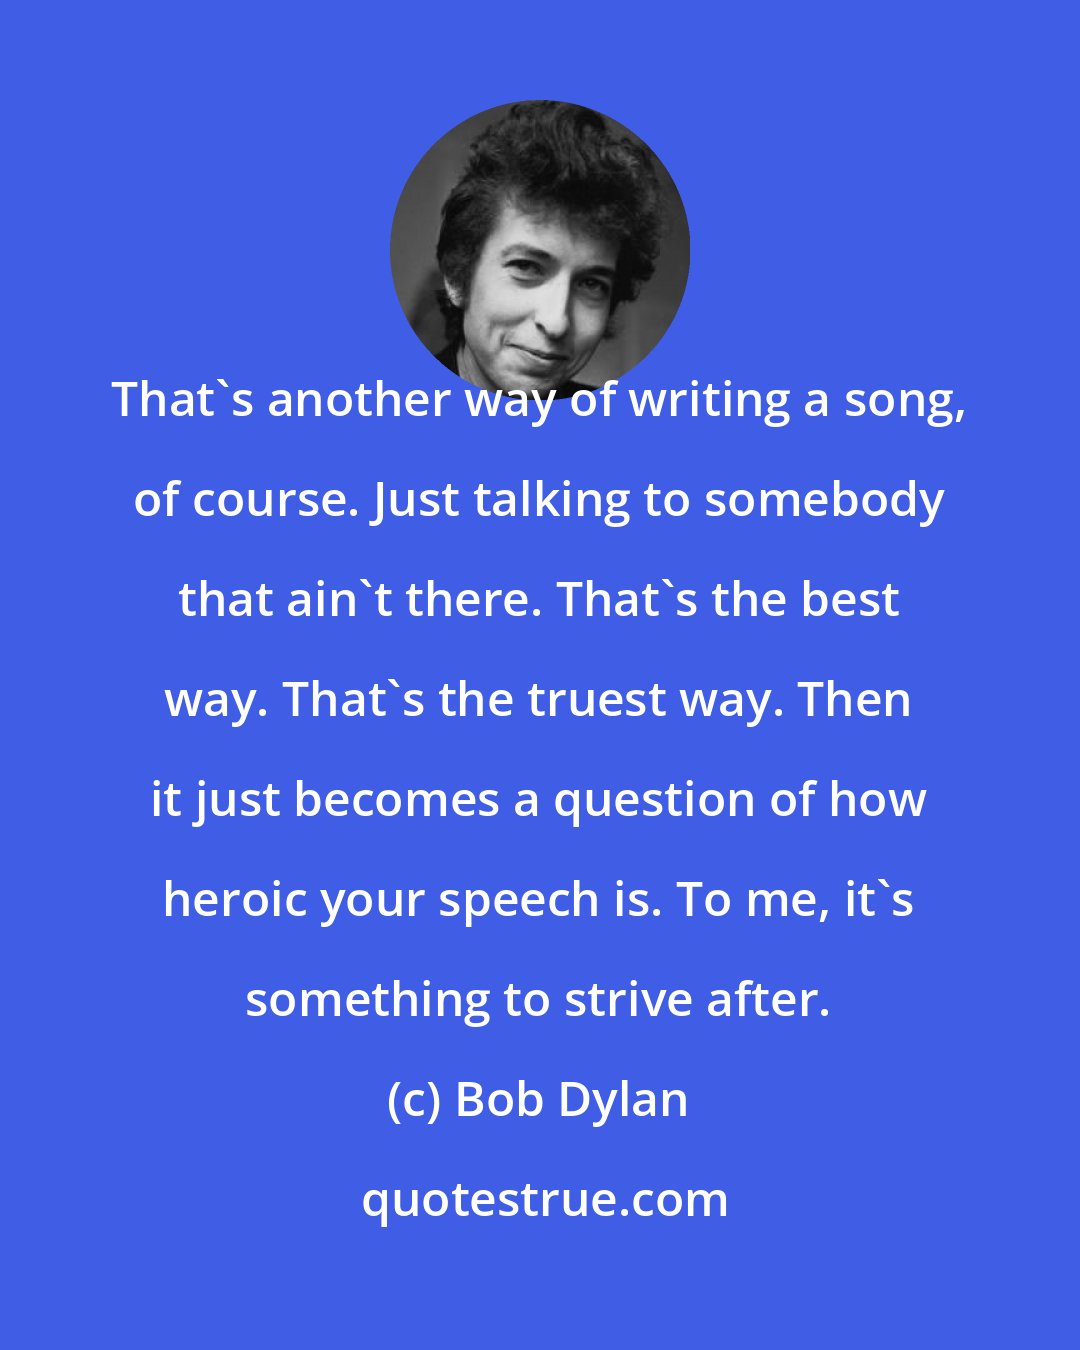 Bob Dylan: That's another way of writing a song, of course. Just talking to somebody that ain't there. That's the best way. That's the truest way. Then it just becomes a question of how heroic your speech is. To me, it's something to strive after.